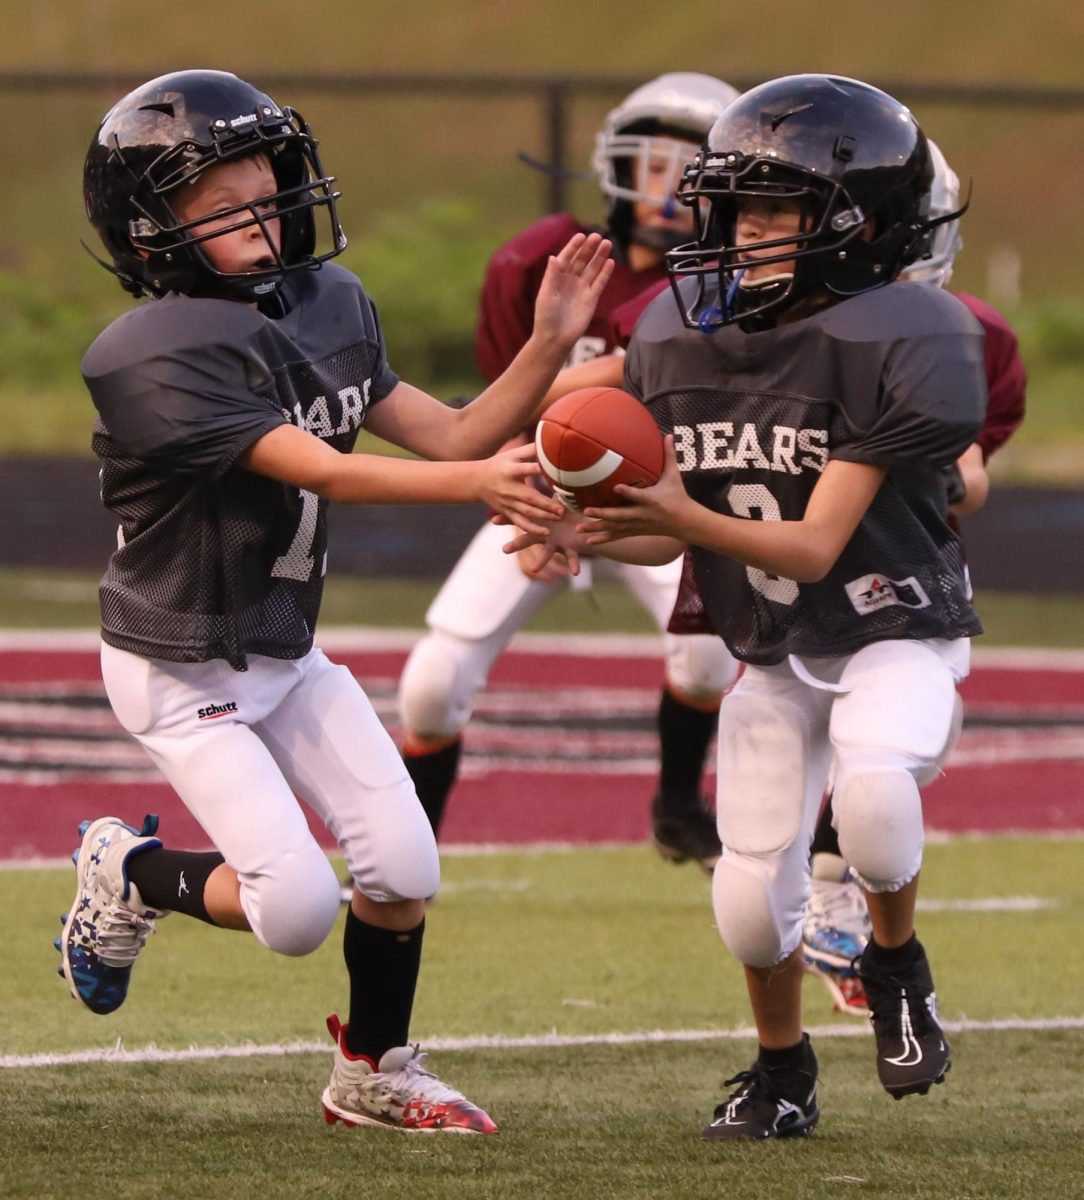 Isaac Combs handed the ball off to Ben Parsons as the Silver Bears were on offense against the Maroon Bears in action Thursday from the Harlan County Pee Wee Football League.